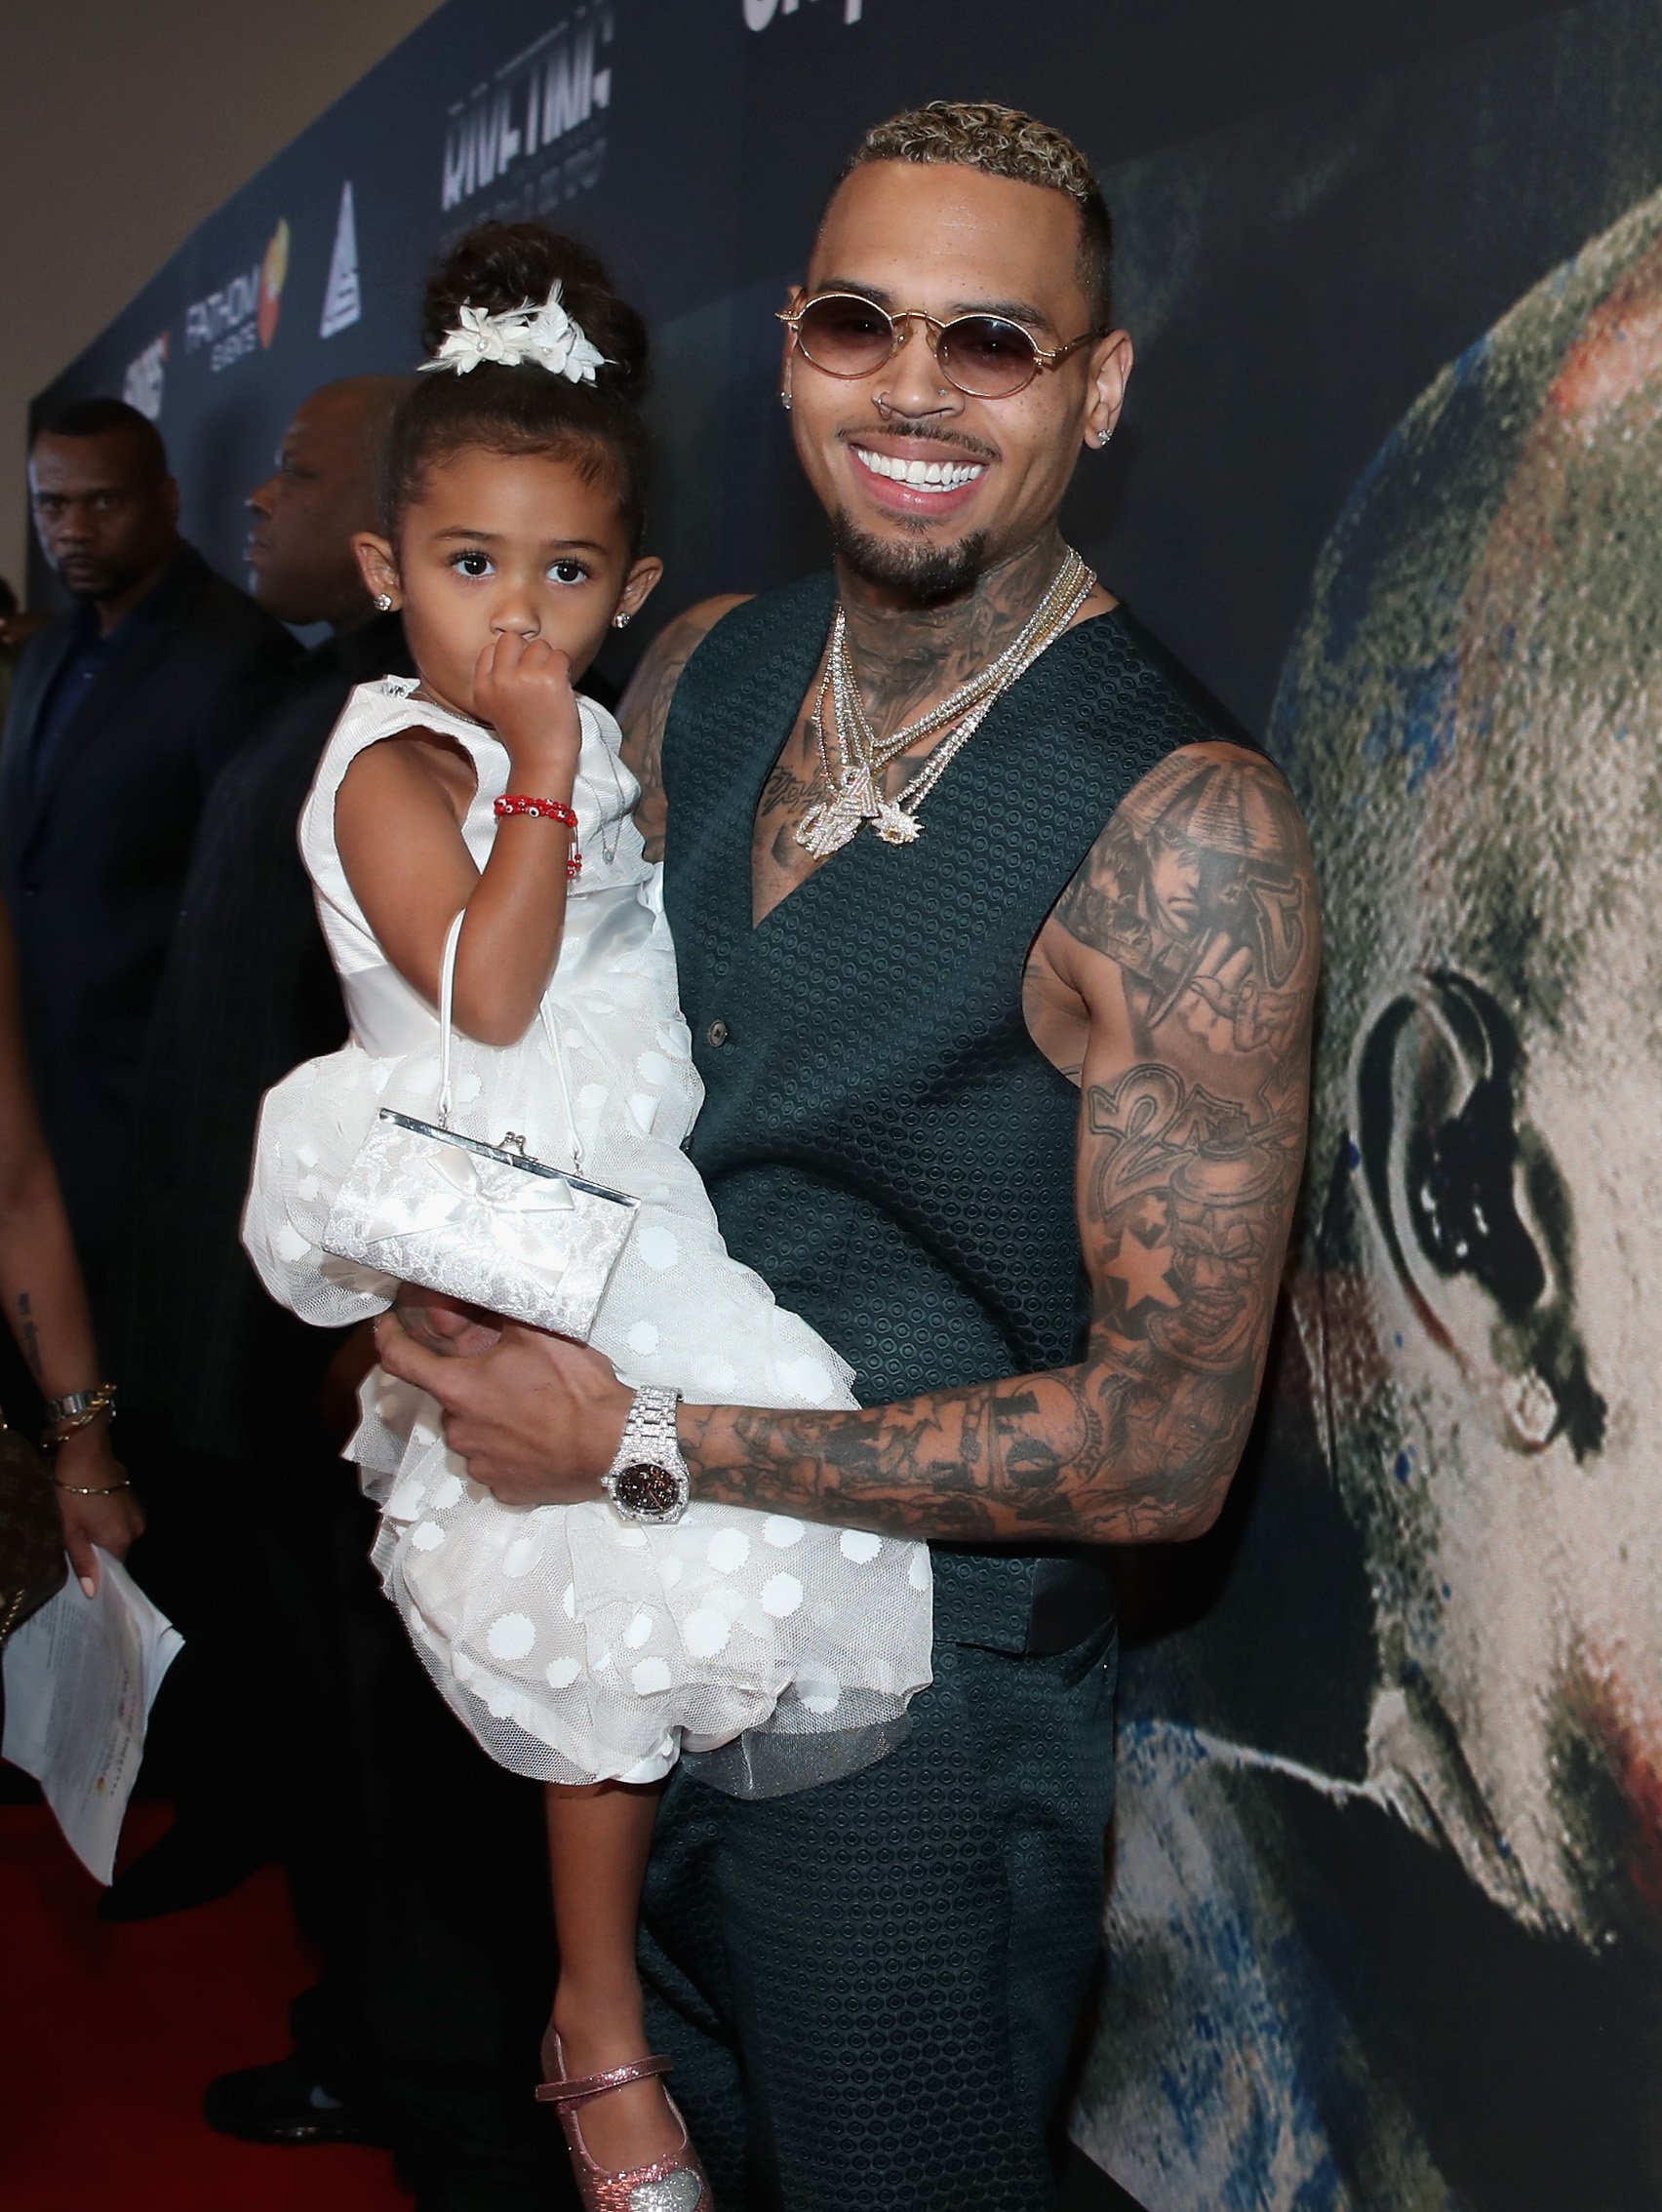 Chris Brown and his daughter Royalty at the premiere of "Chris Brown: Welcome To My Life" on June 6, 2017. | Photo: Getty Images